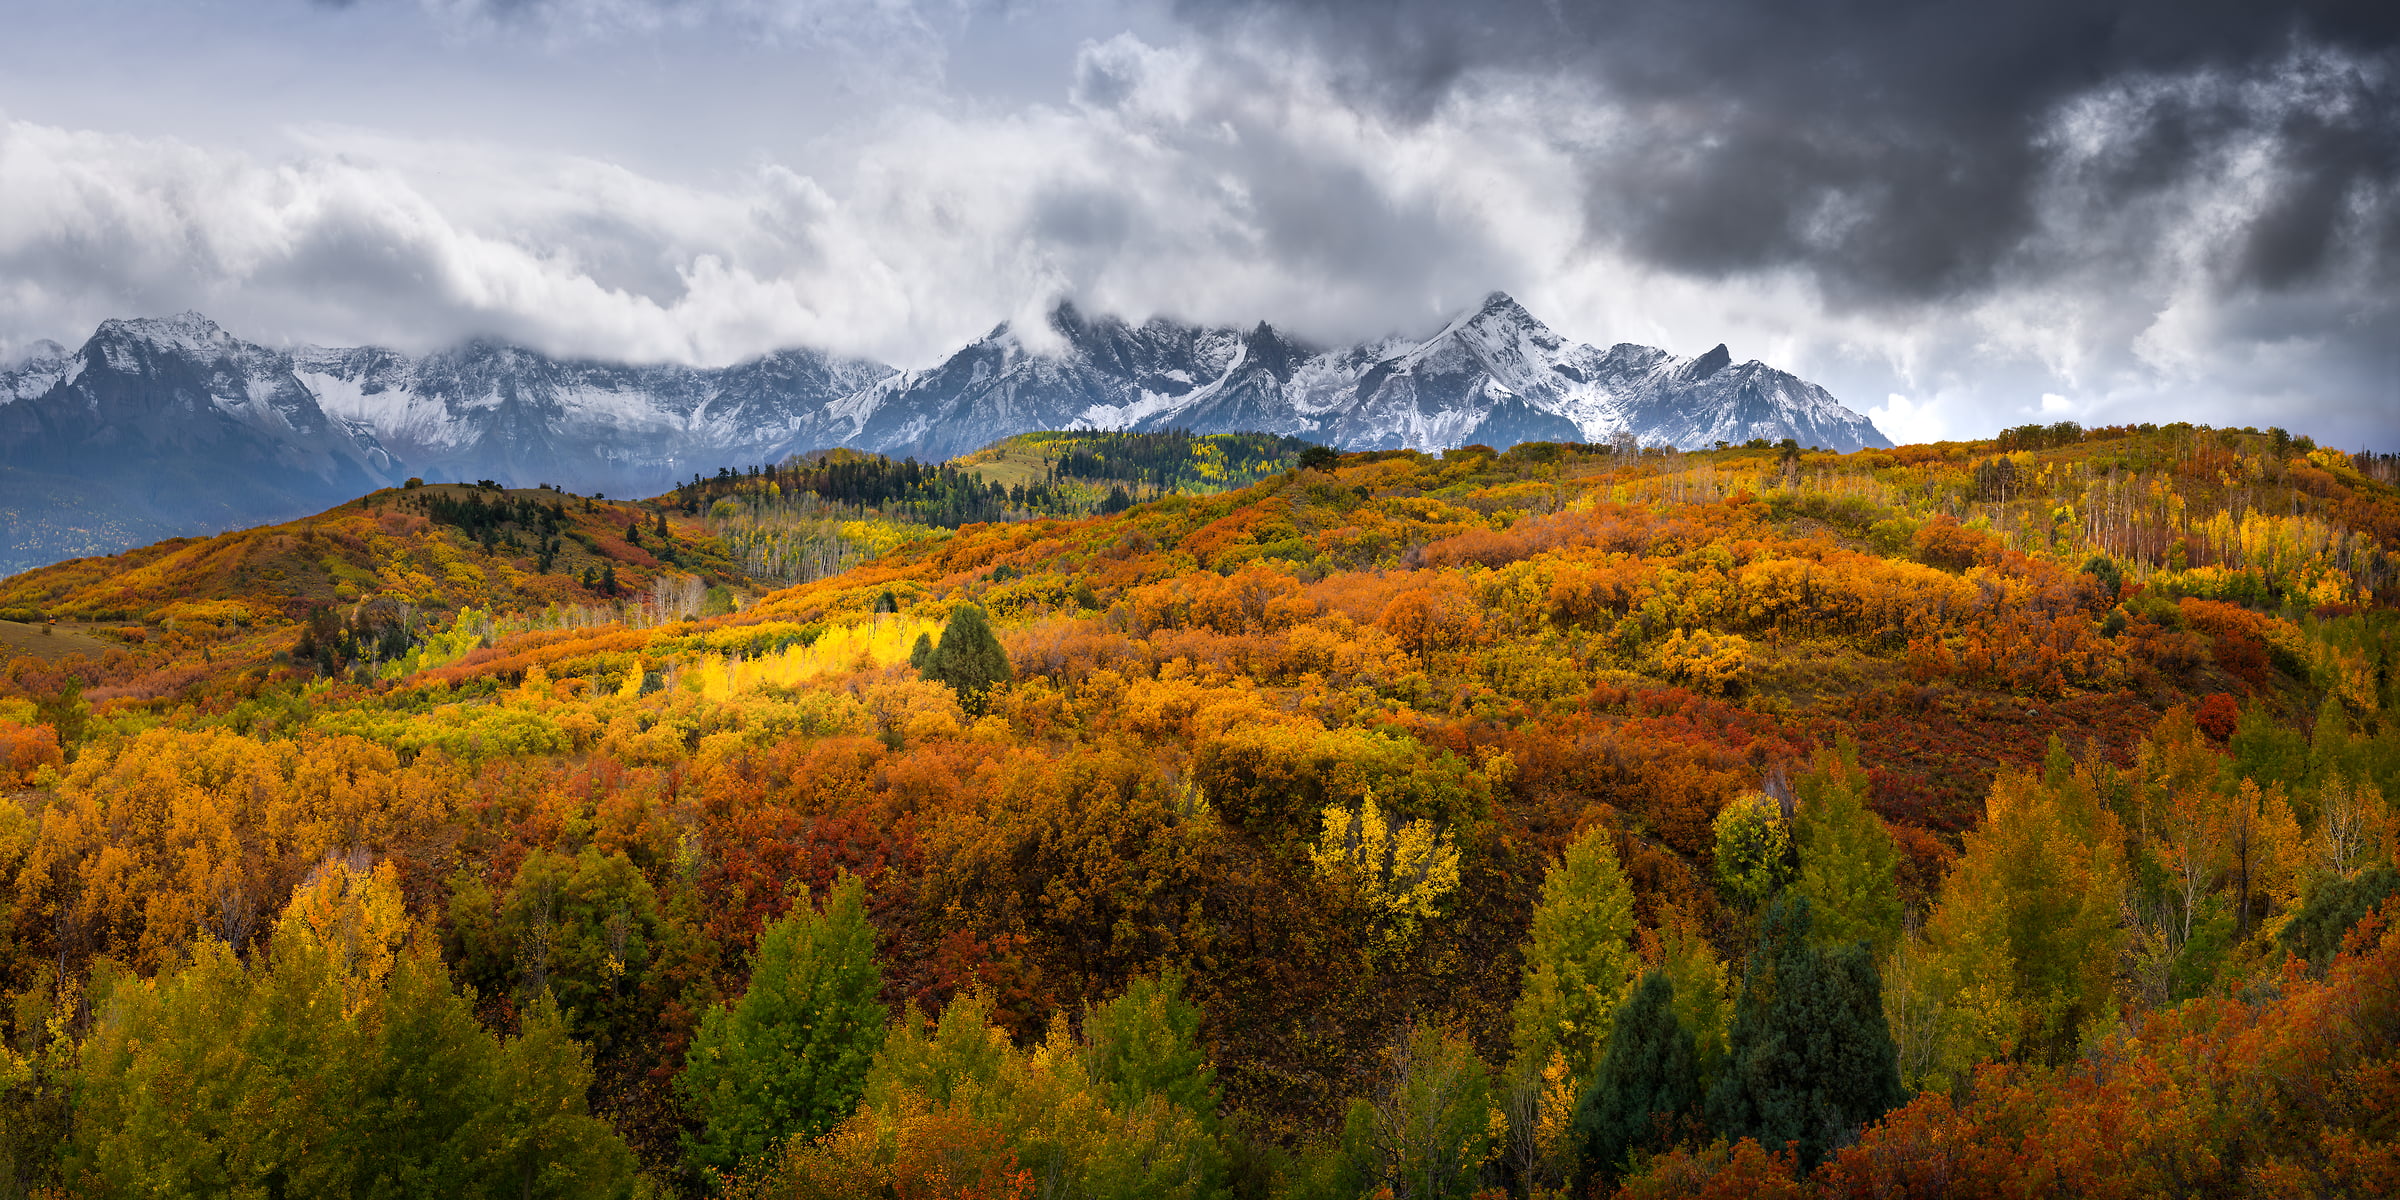 511 megapixels! A very high resolution, large-format VAST photo print of autumn foliage and mountains; landscape photograph created by Jeff Lewis in Ridgway, Colorado.